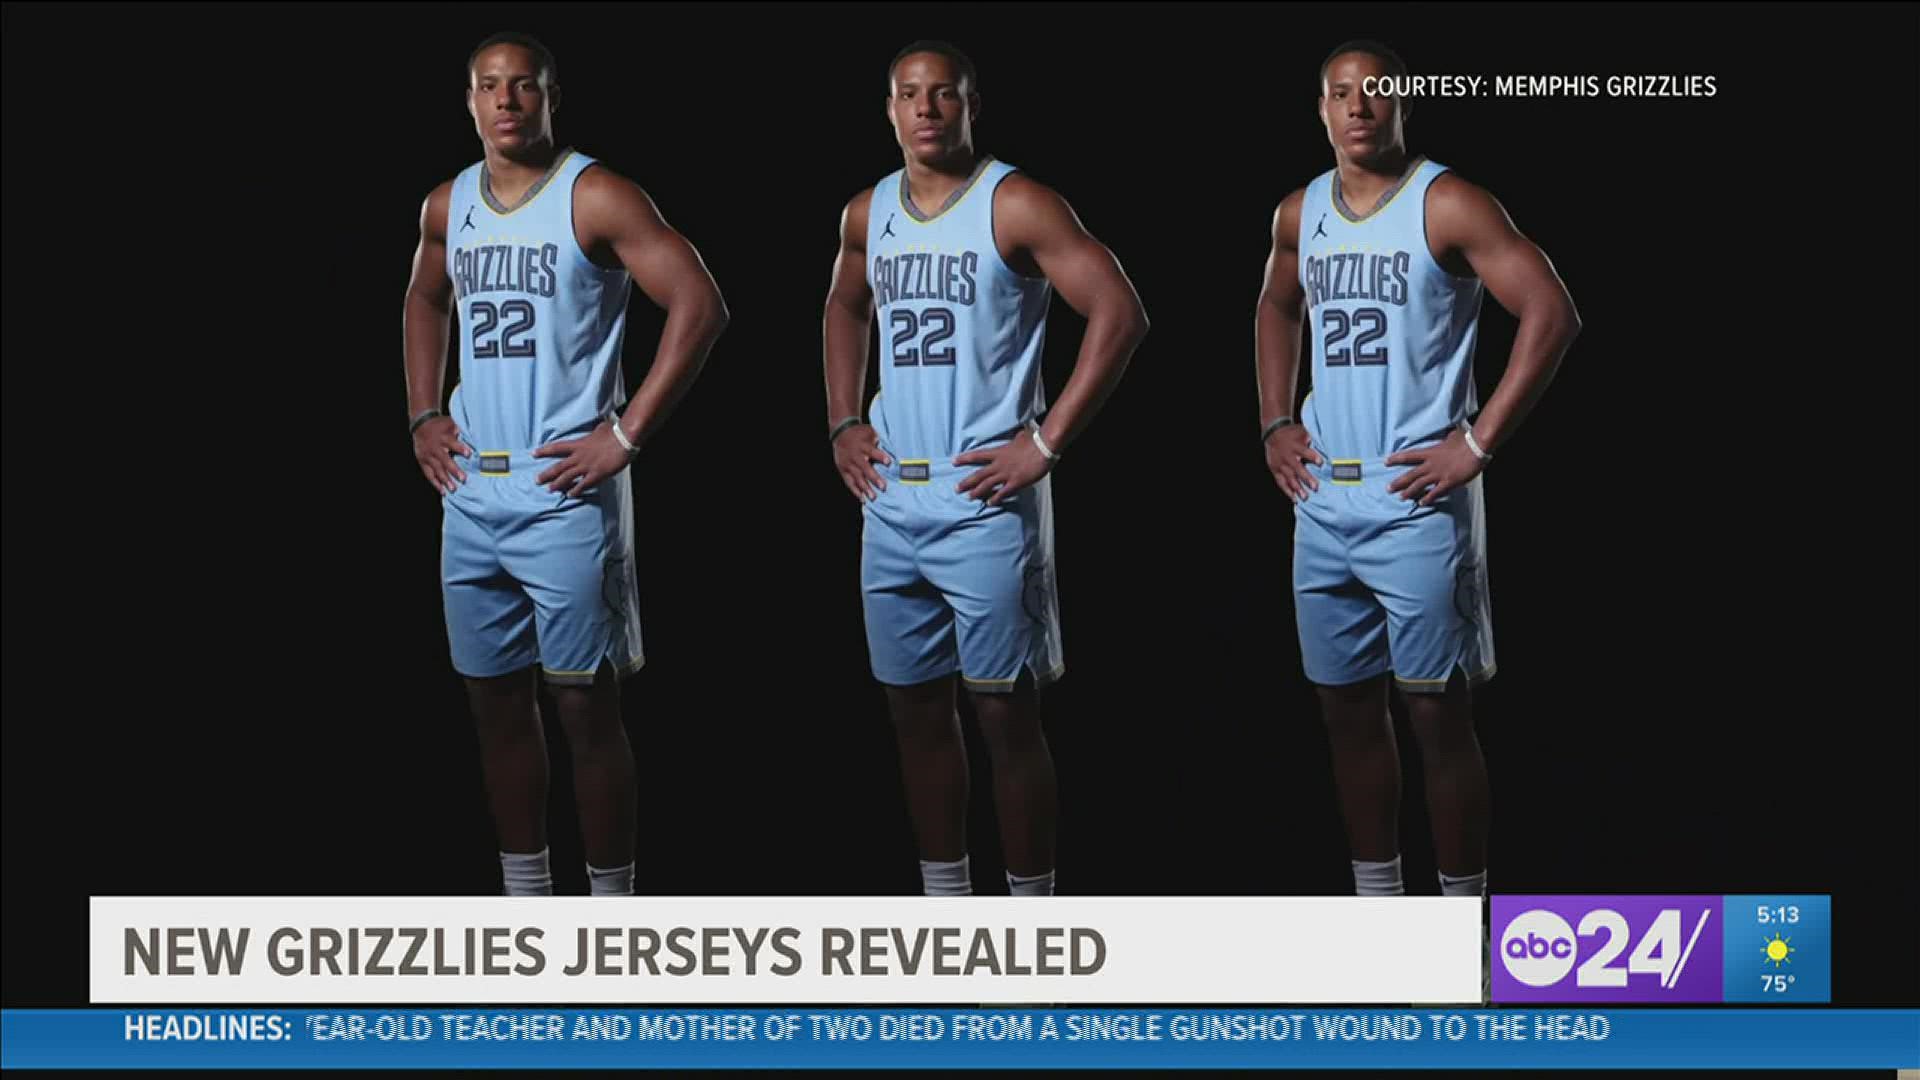 The new jersey is replacing the existing Statement Edition uniform.